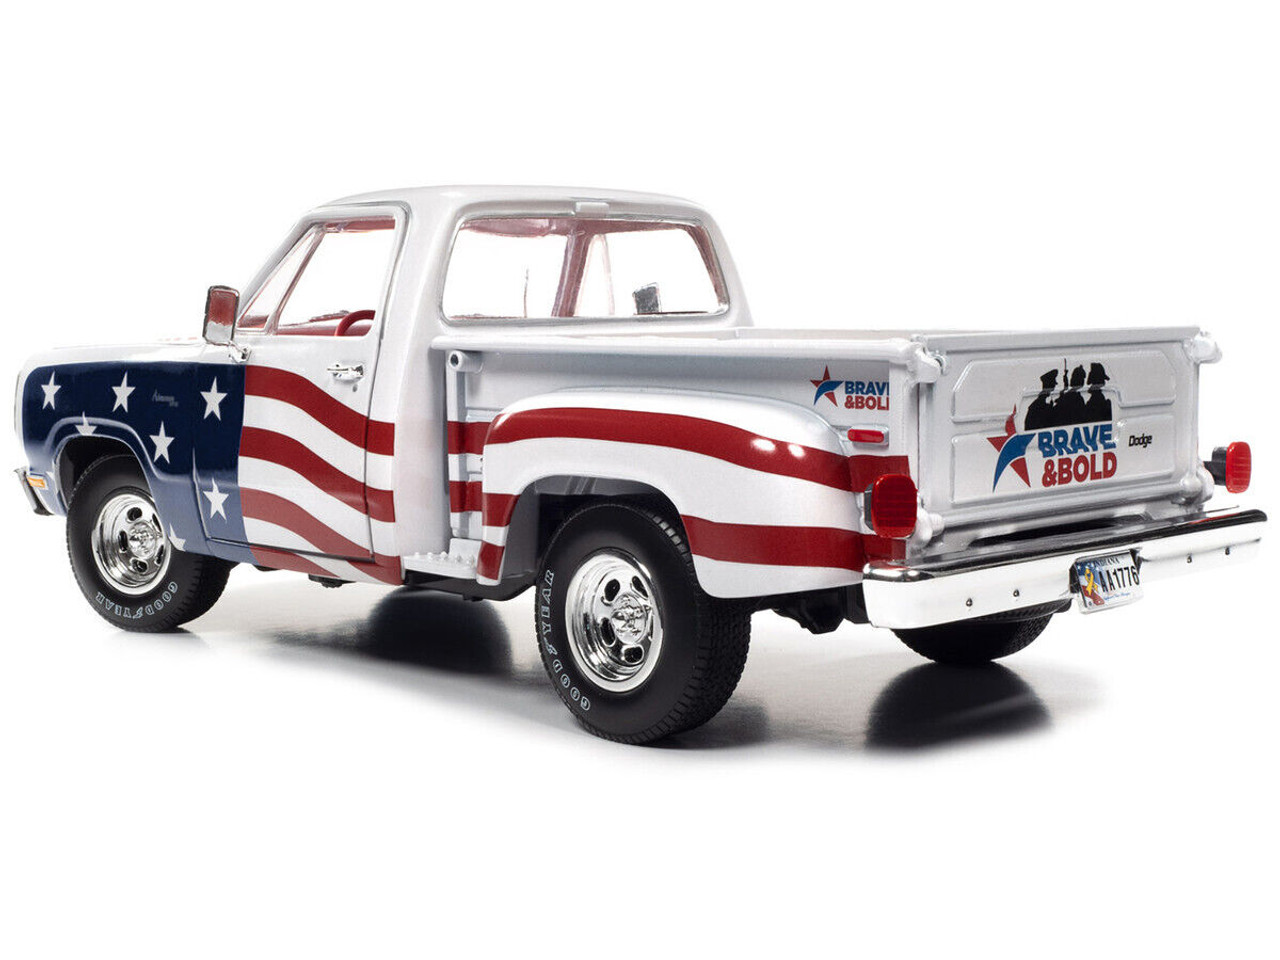 1/18 Auto World 1980 Dodge D150 Adventurer Pickup Truck White with American Flag Graphics and Red Interior Diecast Car Model